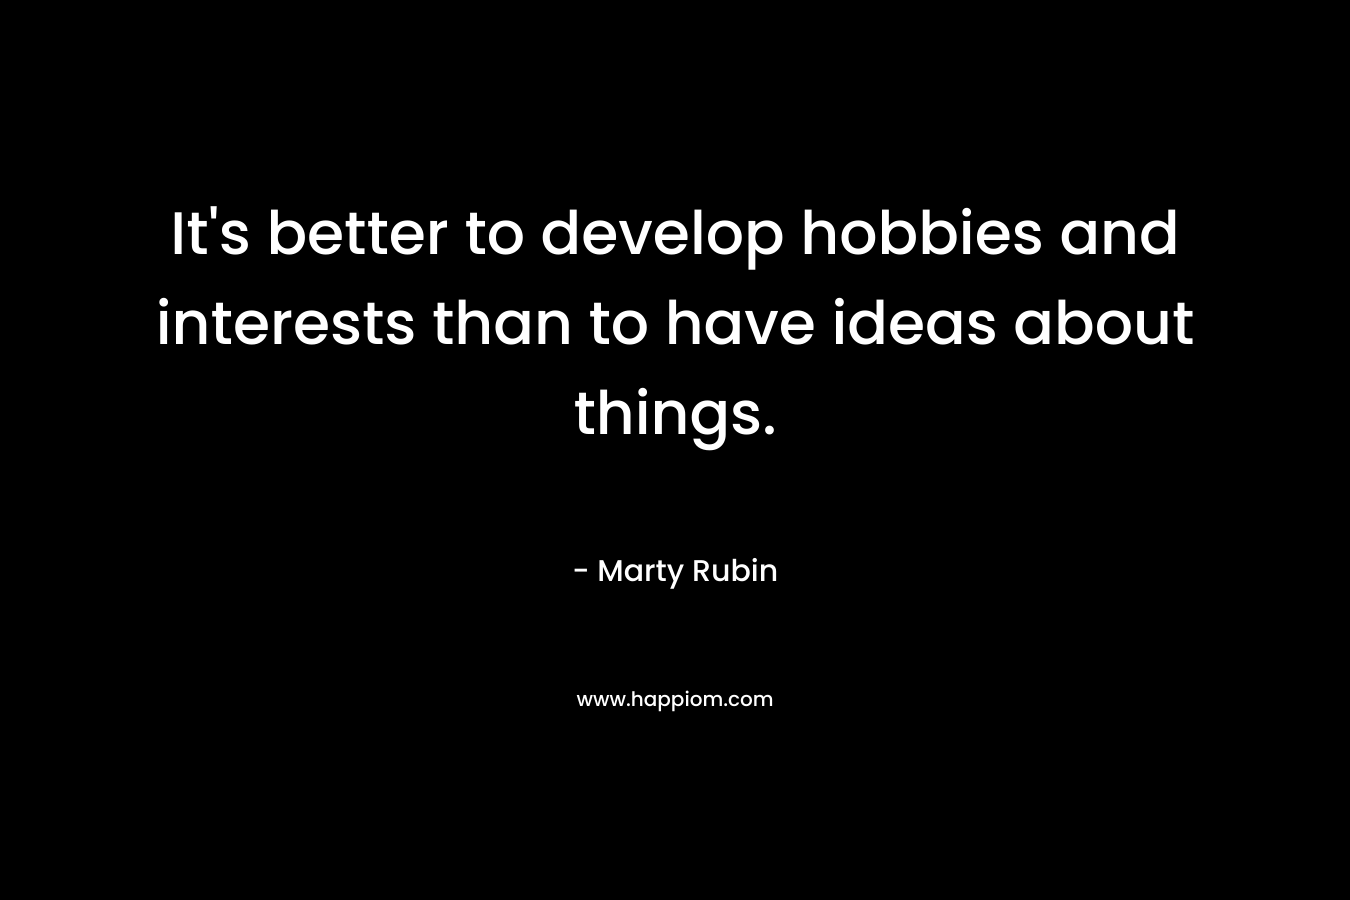 It’s better to develop hobbies and interests than to have ideas about things. – Marty Rubin